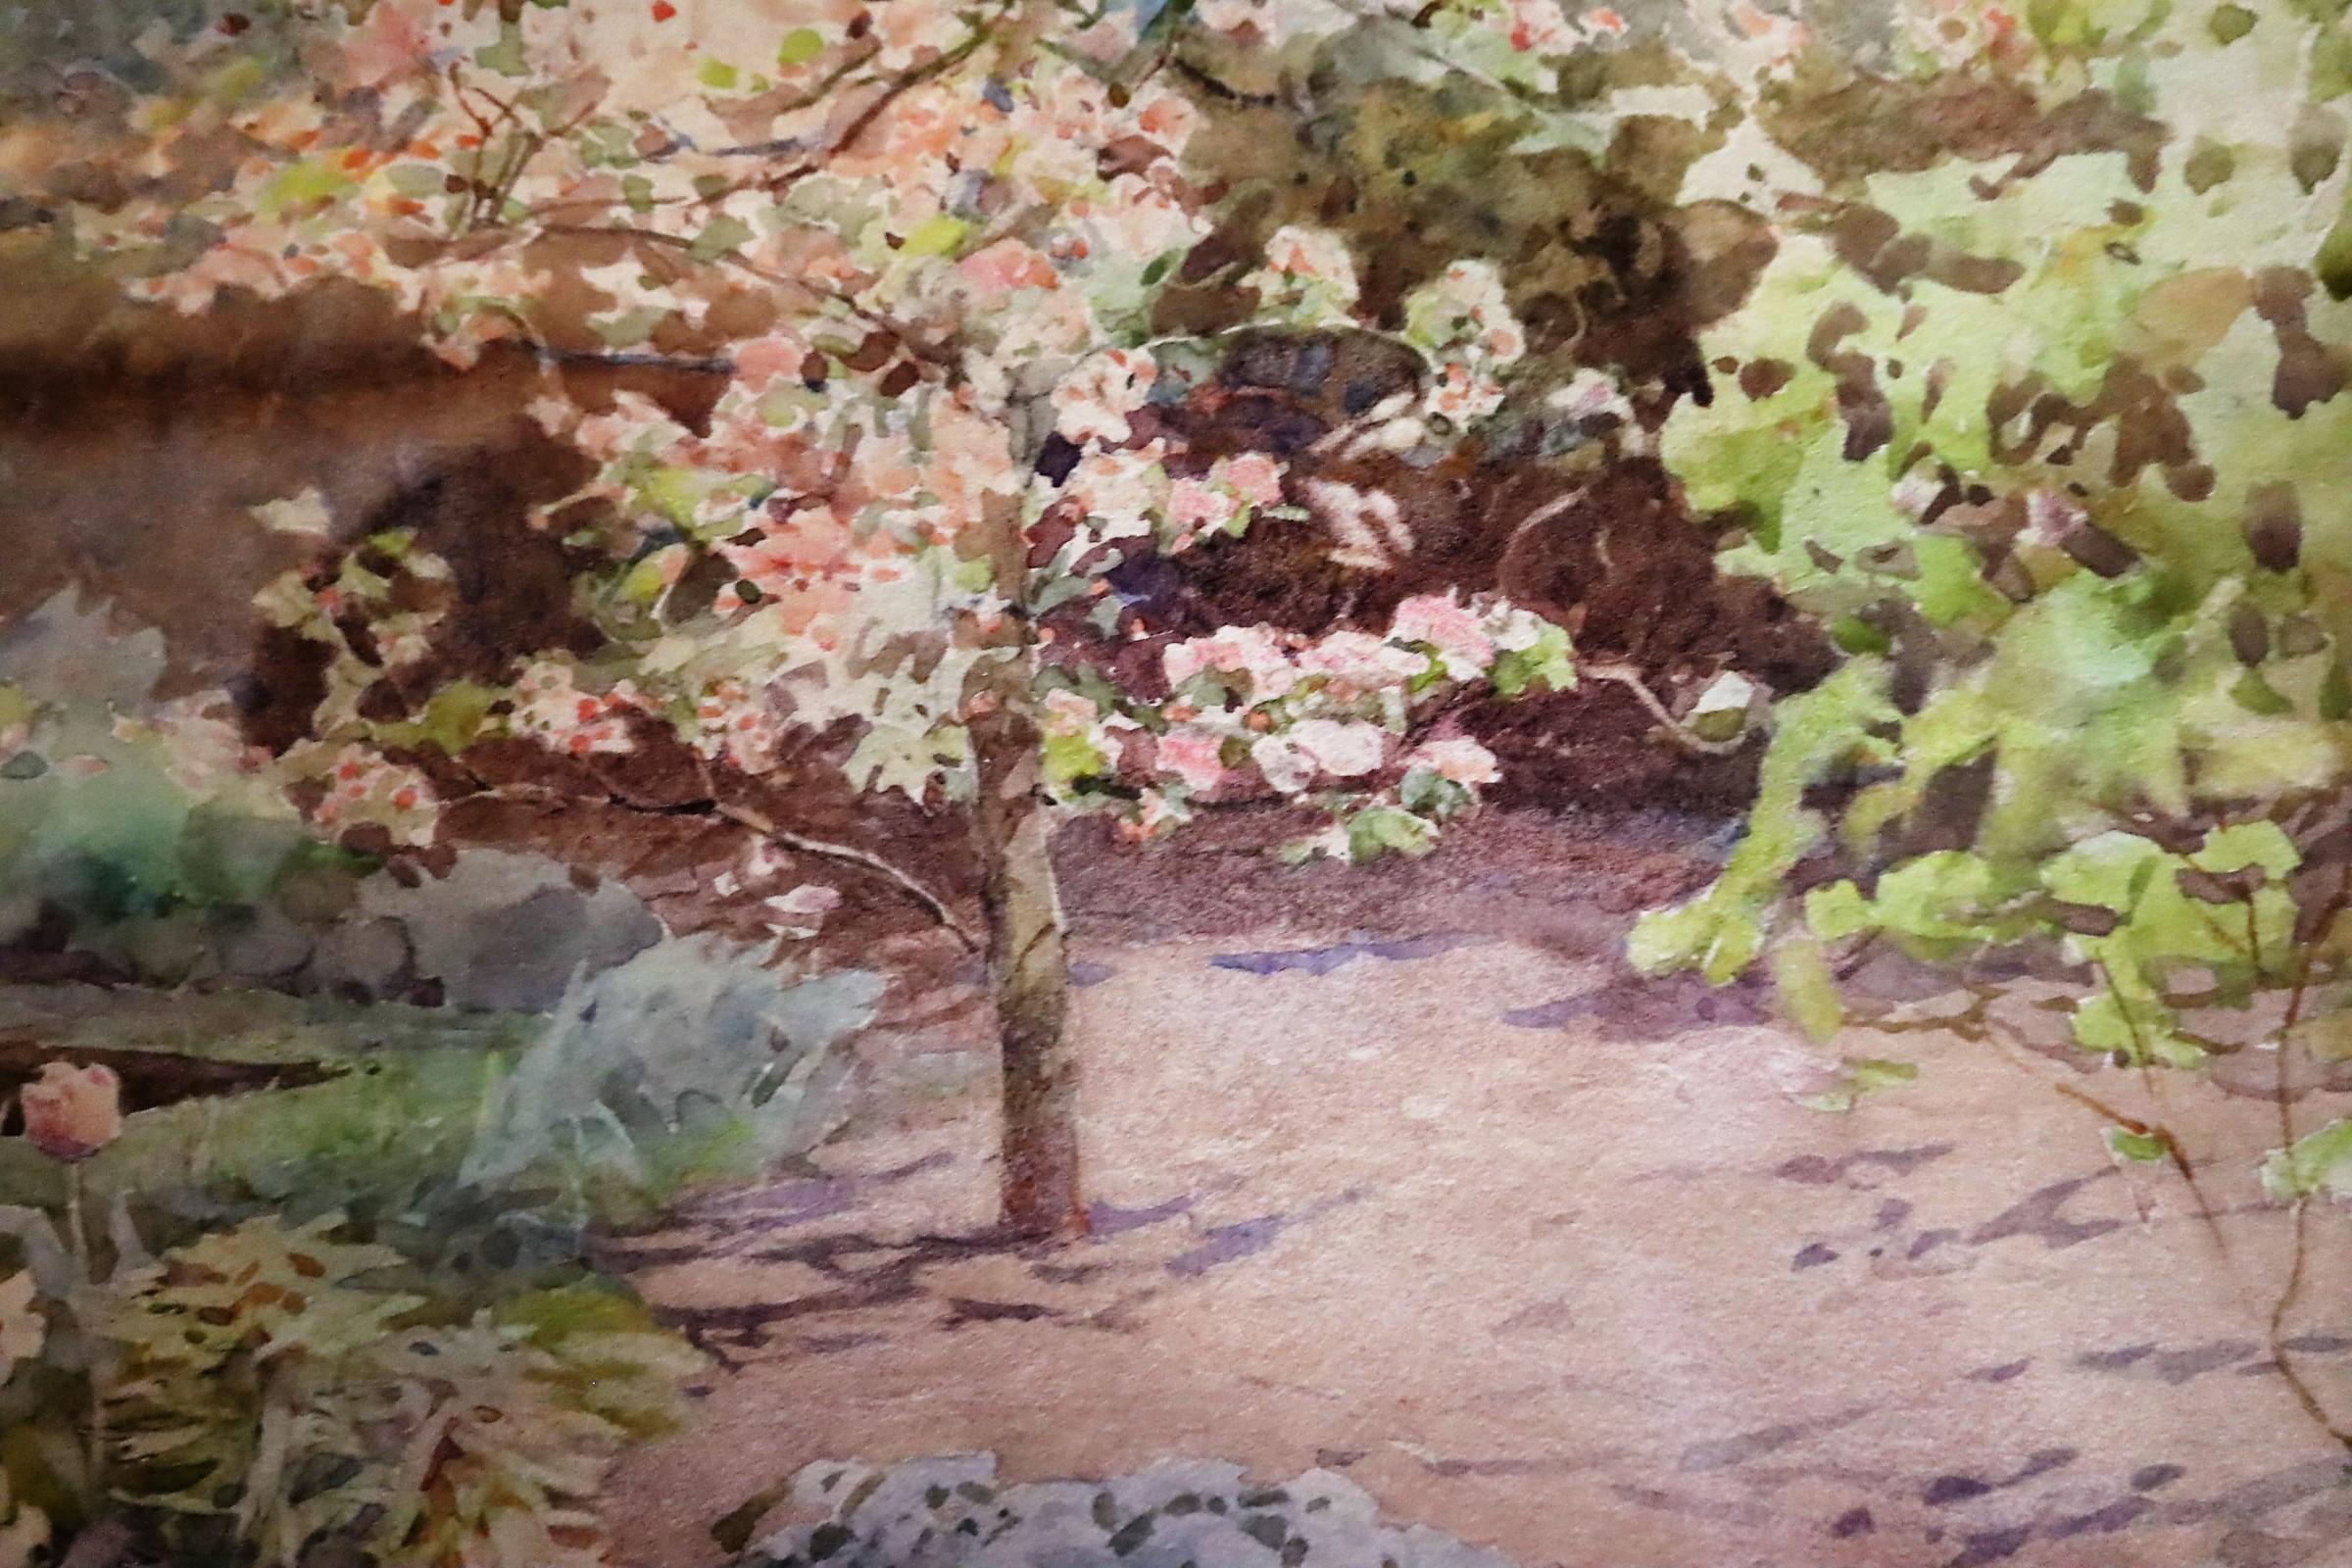 Ernest Albert Chadwick 1876-1955
Trees in Blossom beside a Pond
Signed
Watercolour
18cms x 26cms
Framed